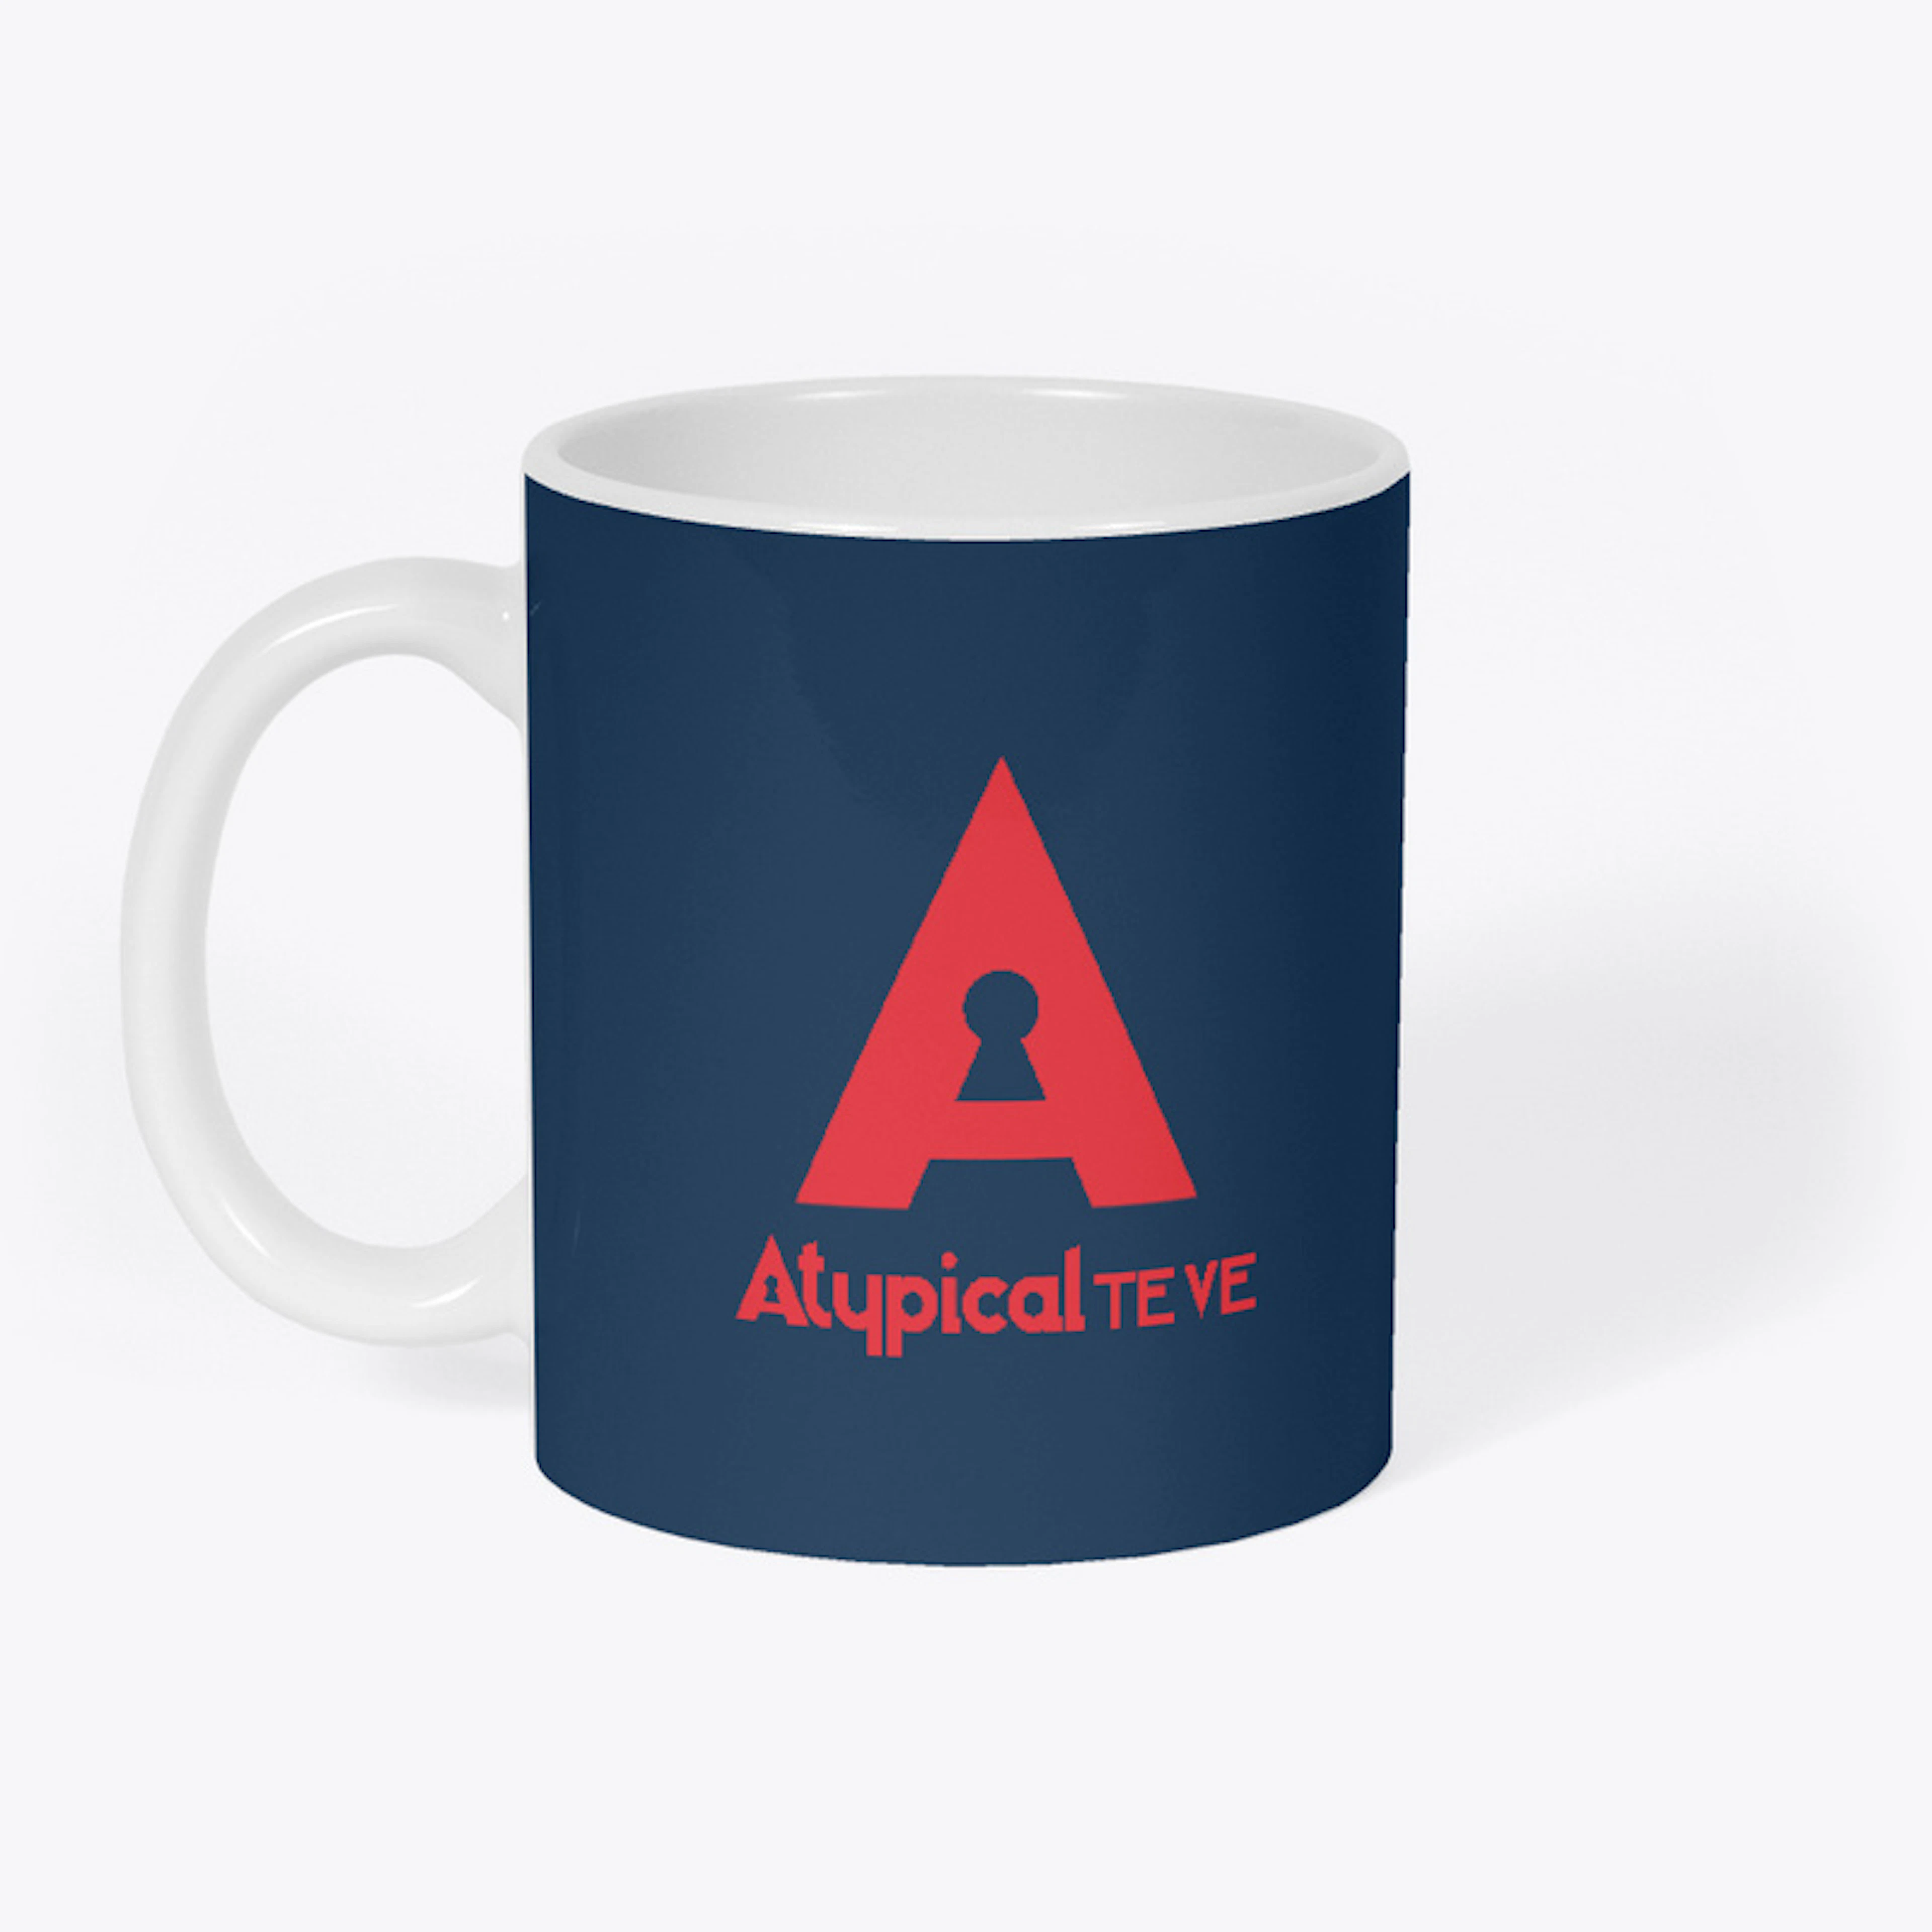 LOGO ATYPICAL TE VE